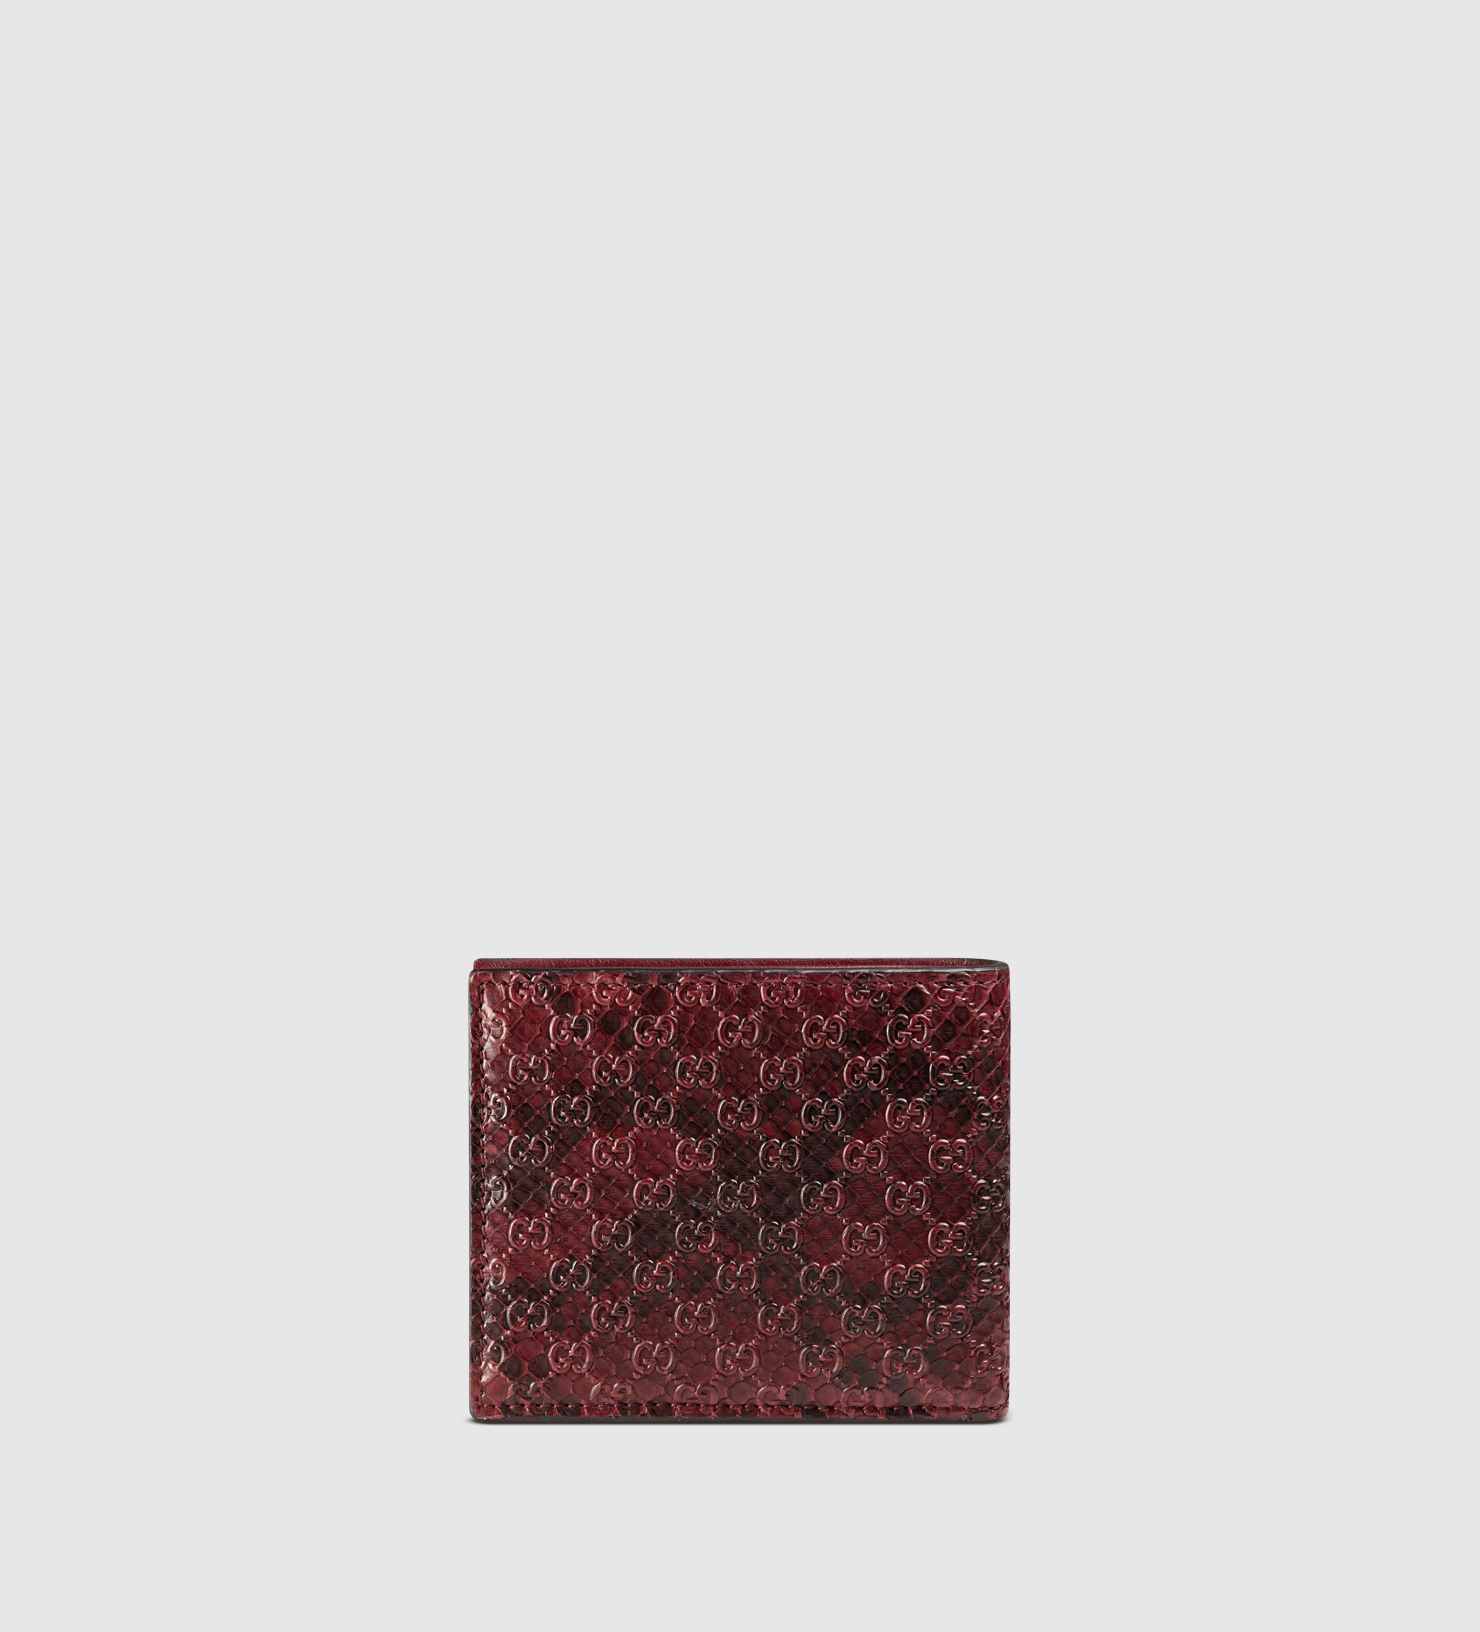 Gucci Python Bi-fold Wallet in Red for Men - Lyst